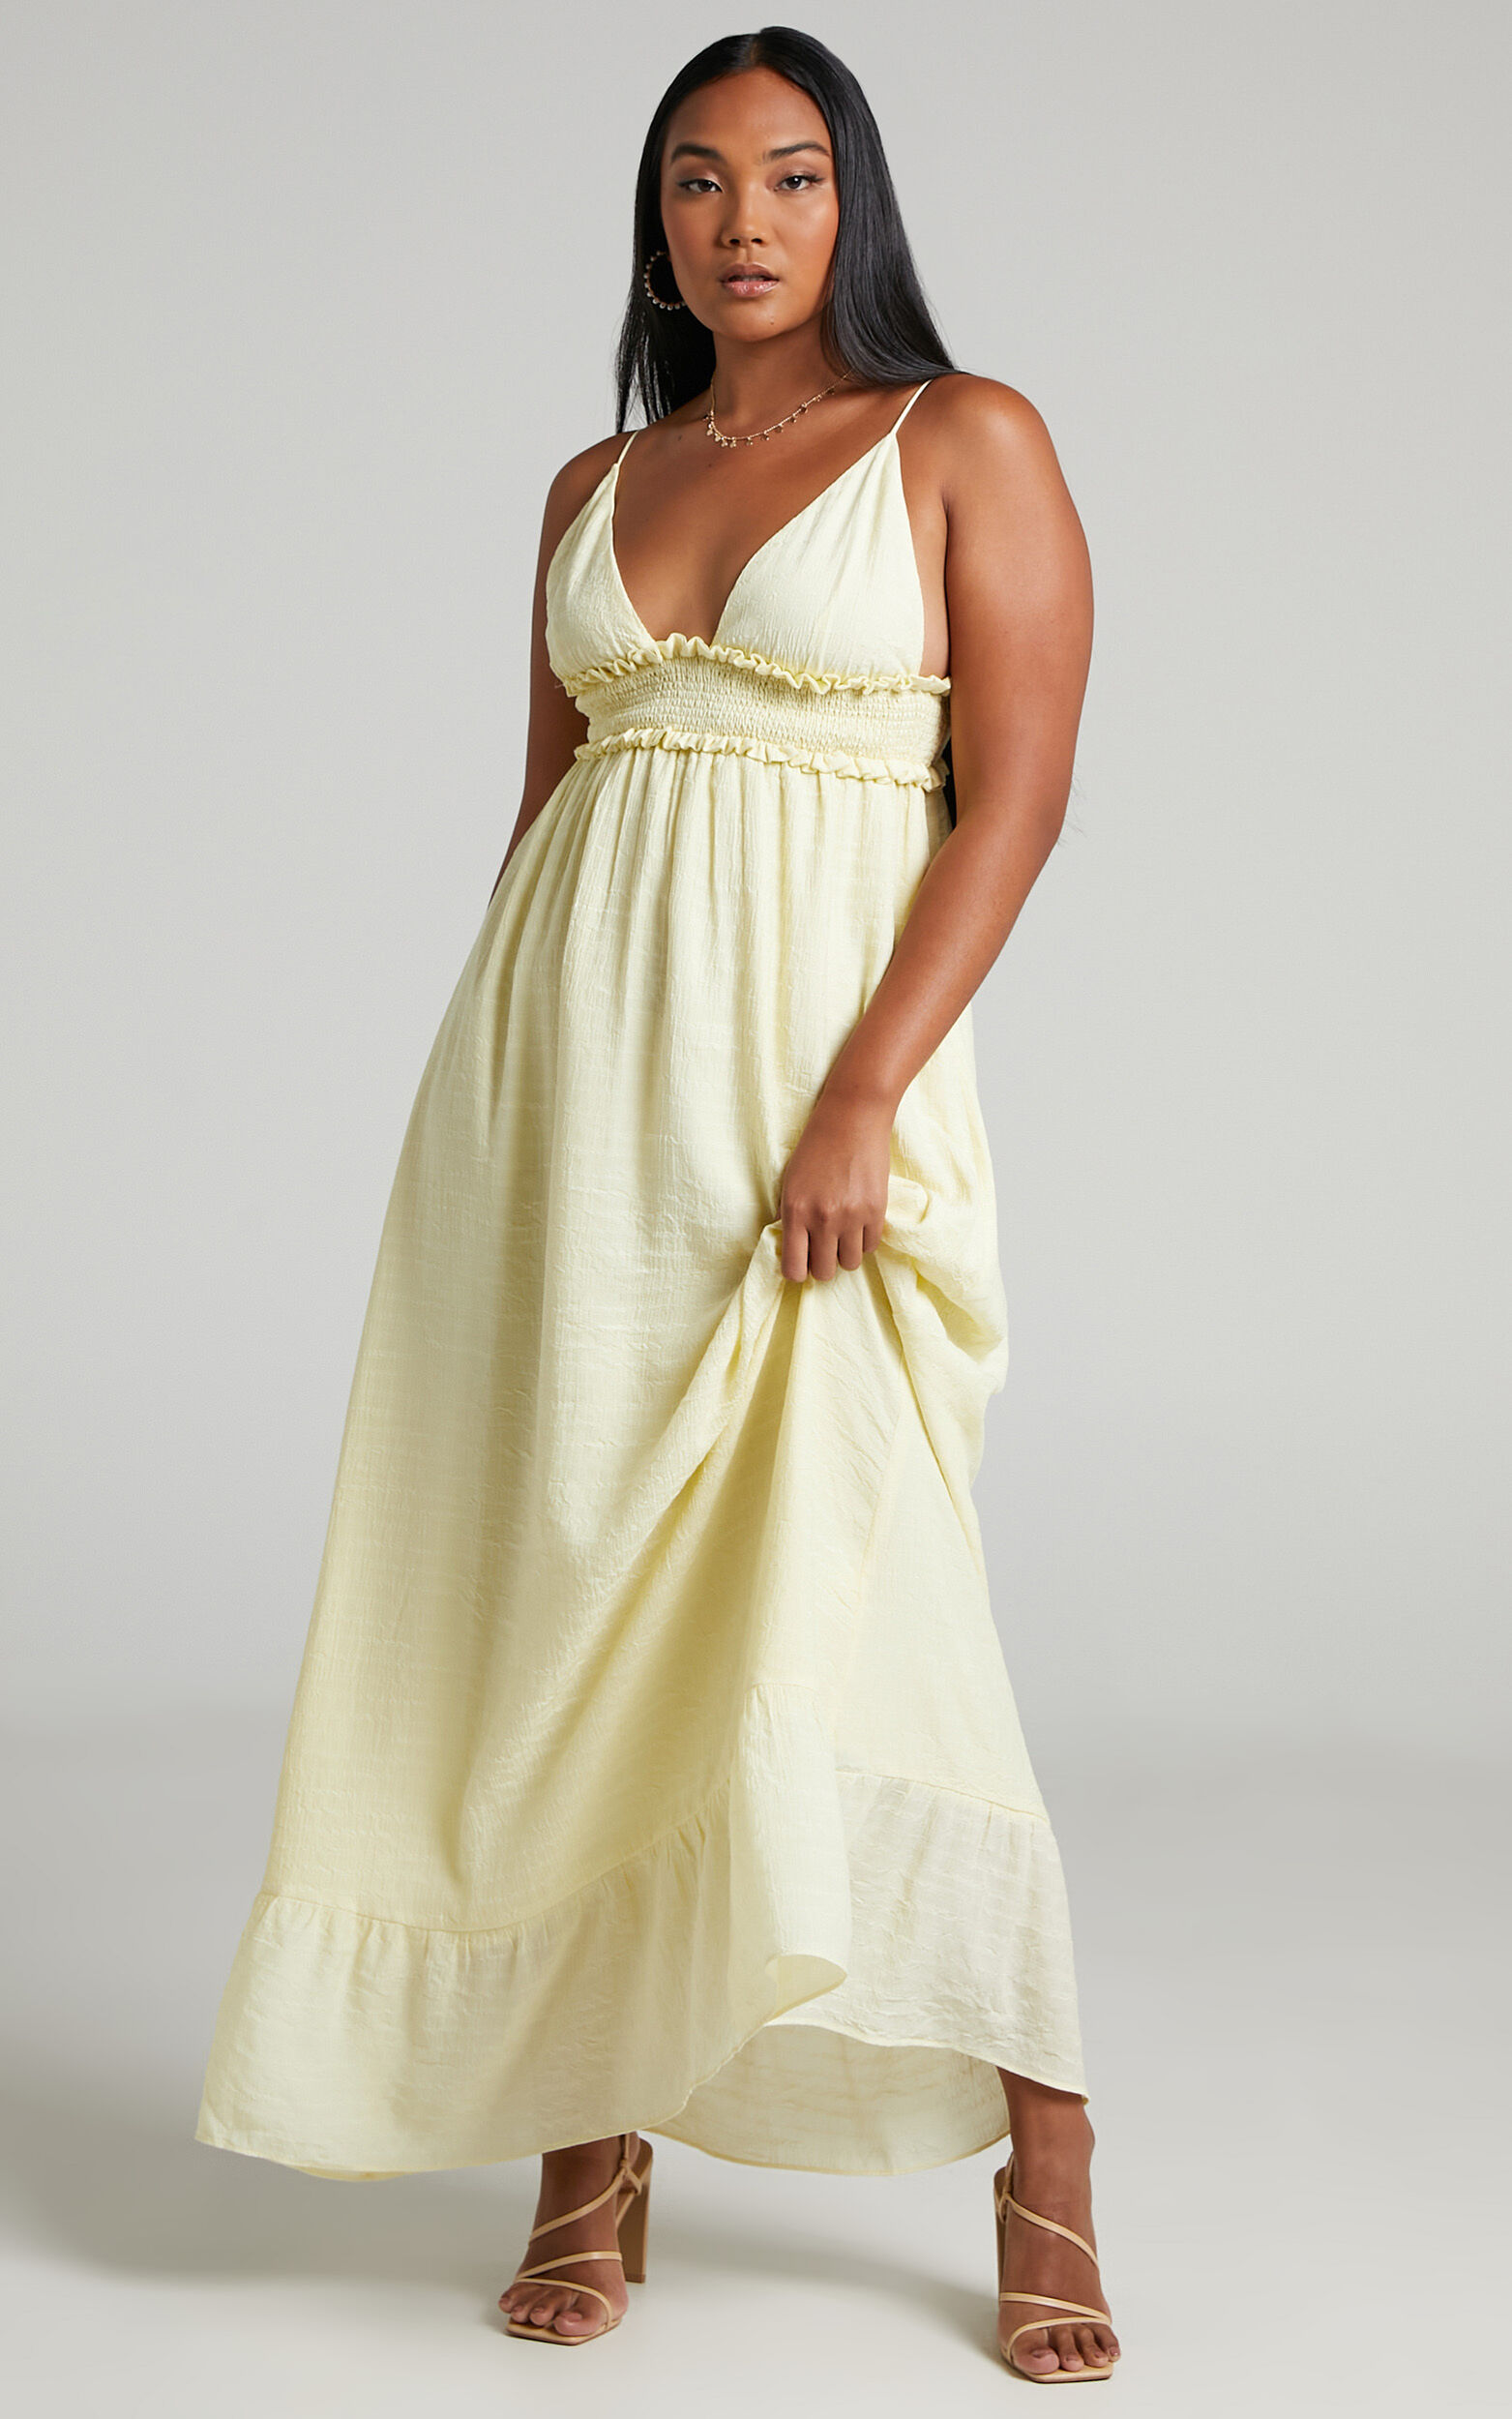 Millseila Strappy Full Skirt Maxi Dress in Yellow - 04, YEL1, super-hi-res image number null